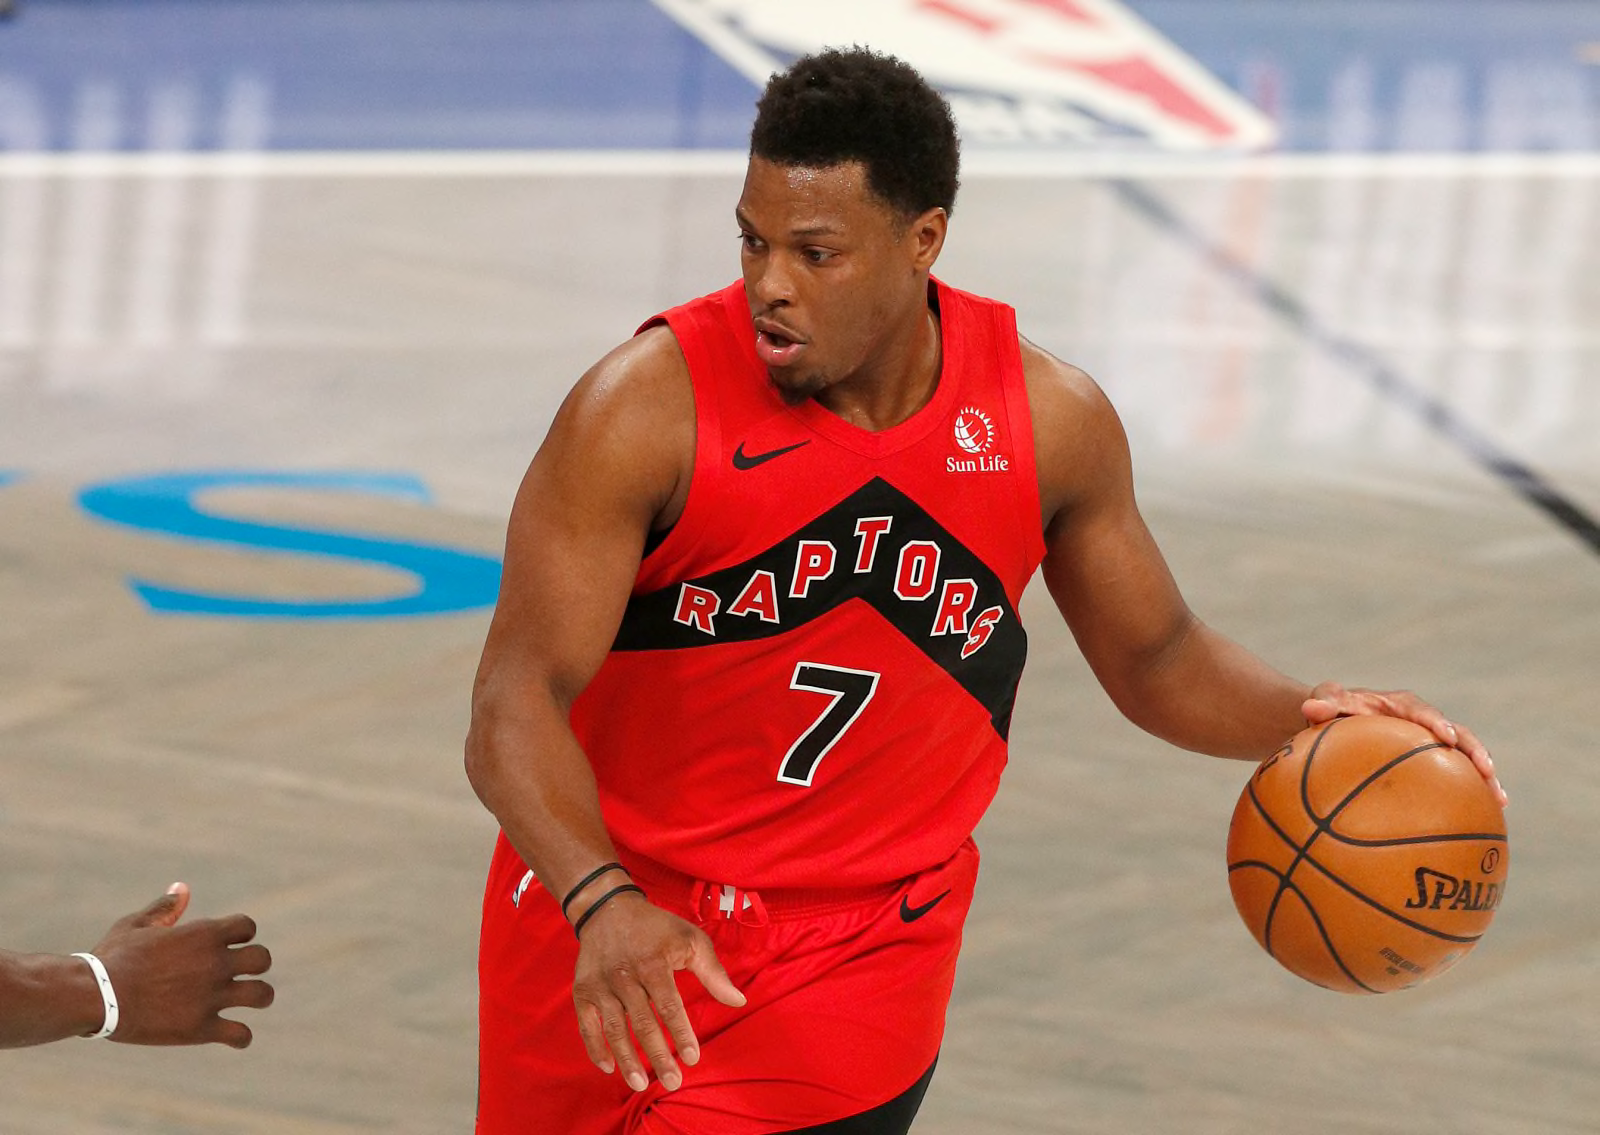 kyle lowry all star game